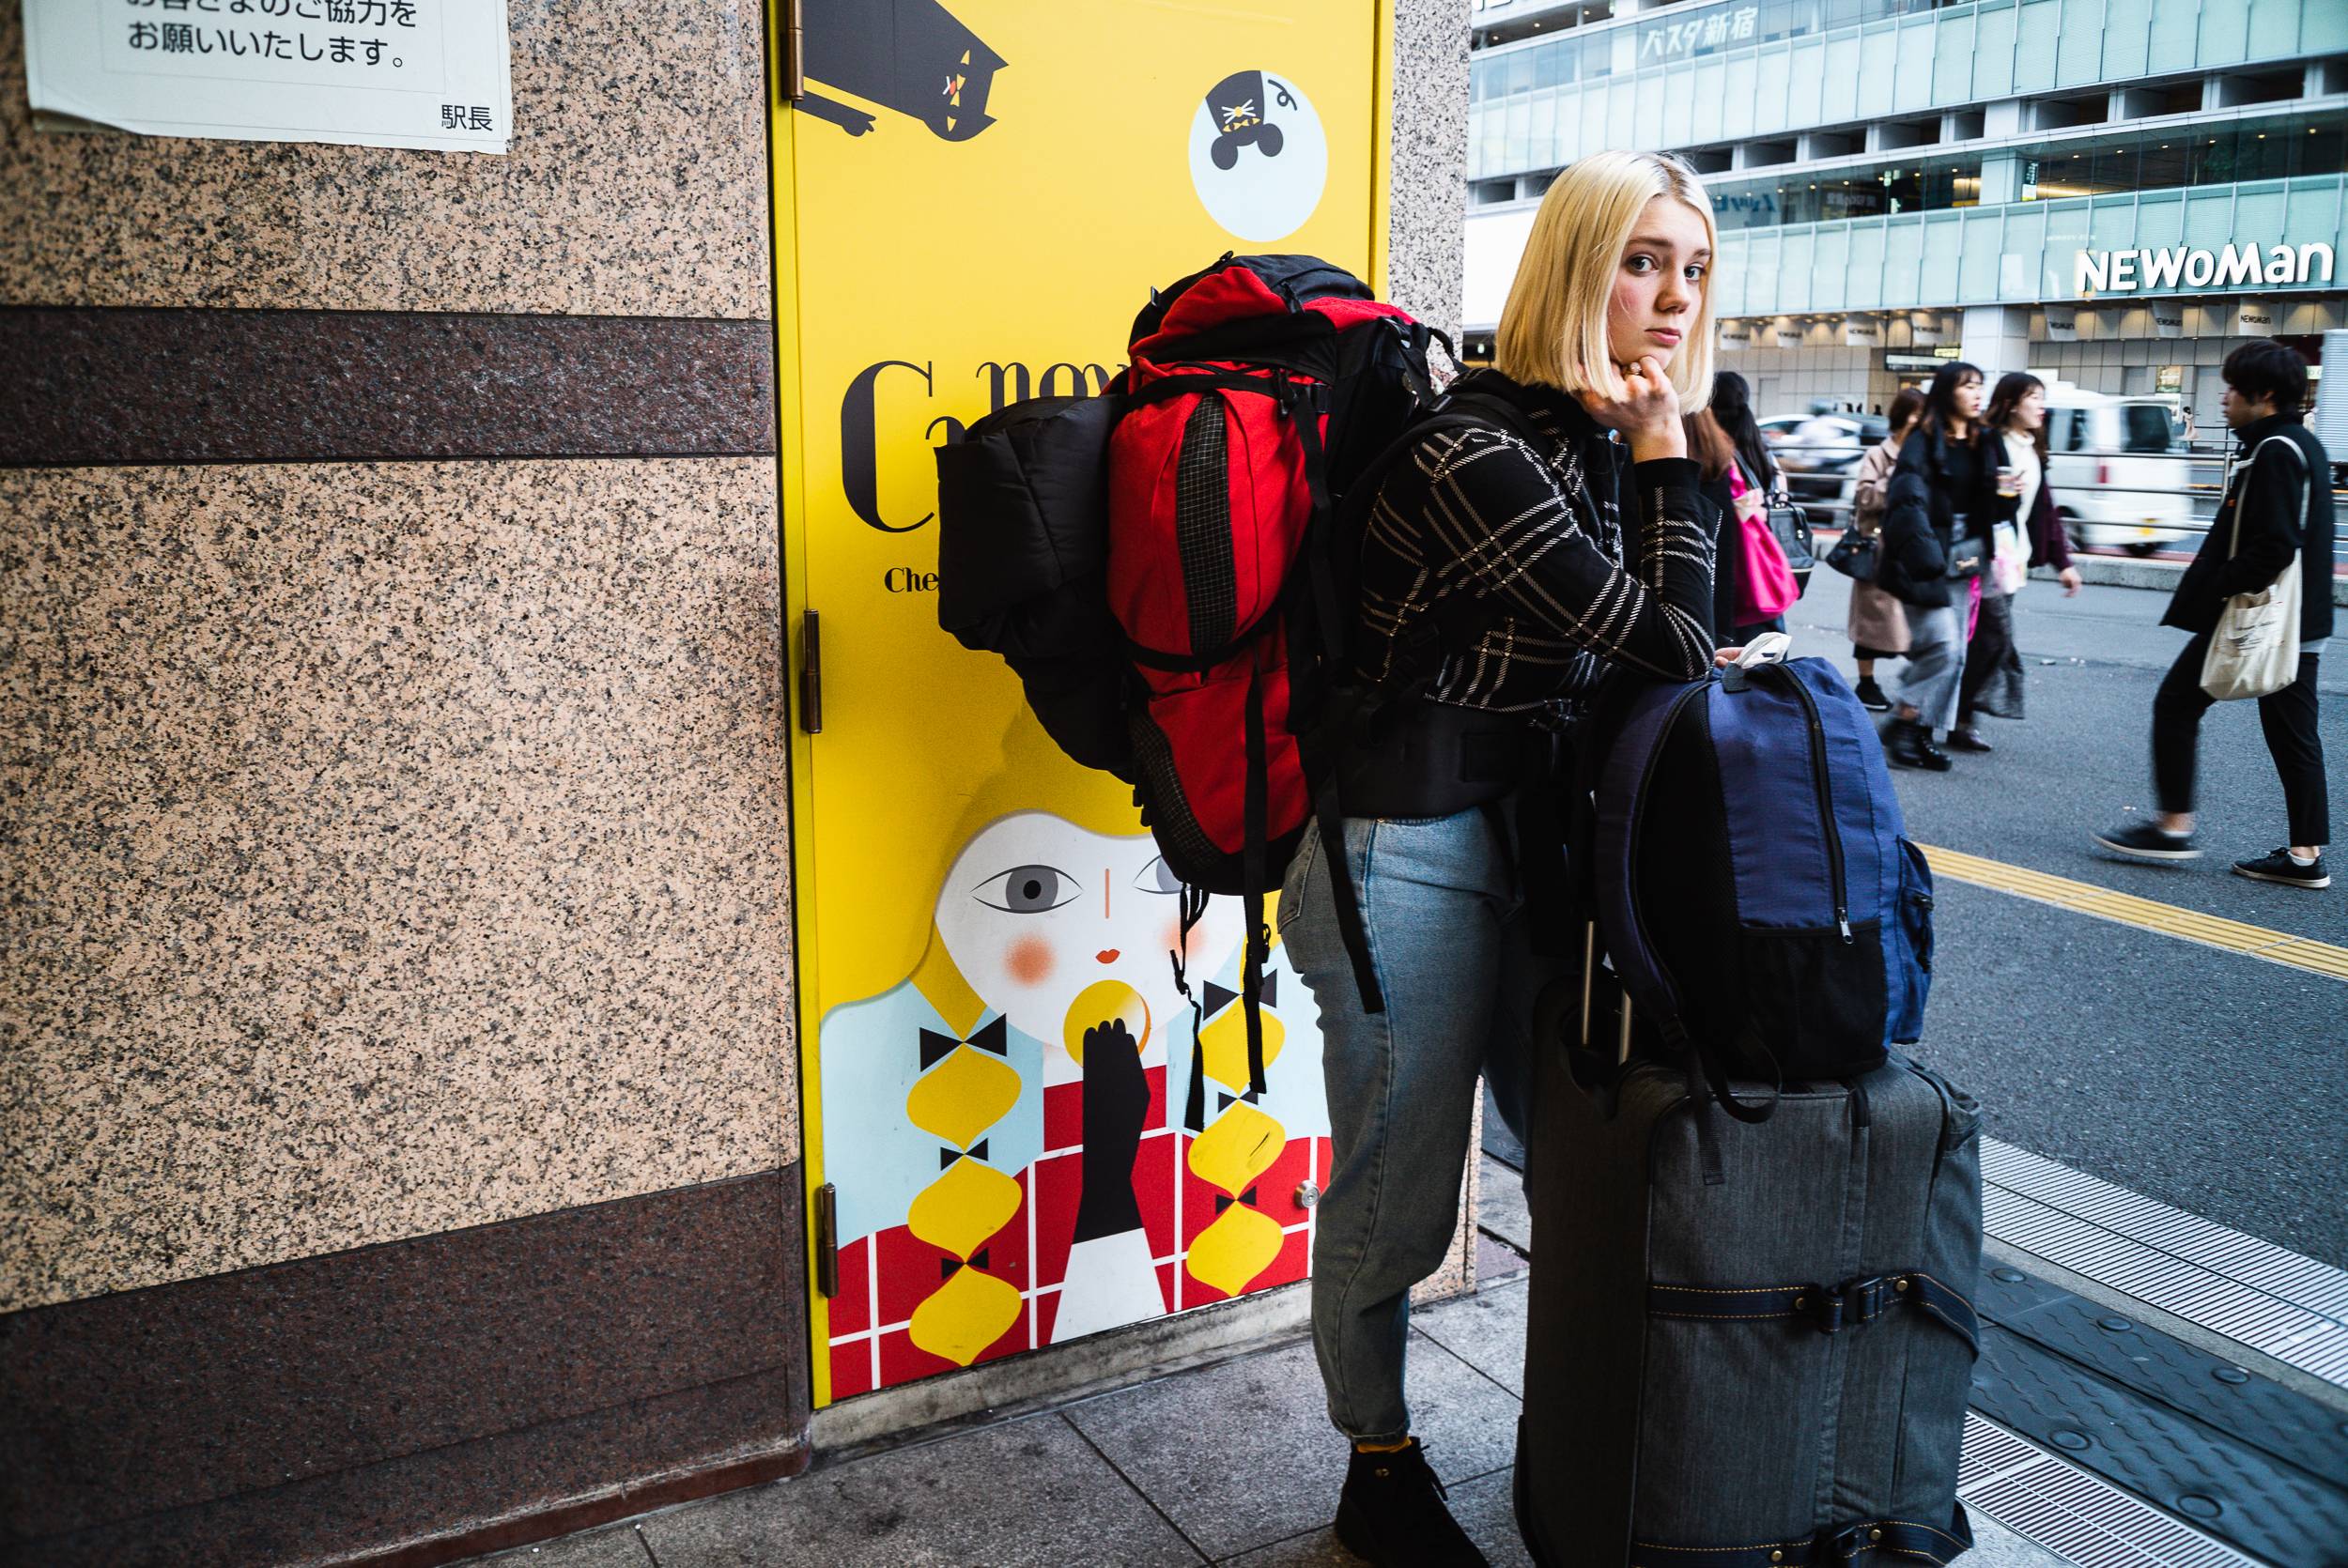 Carrying luggage to the airport may be the easier part of your journey home. International shipping companies were hit hard by the pandemic and appear to still be passing the costs on to customers.  | © JOHAN BROOKS